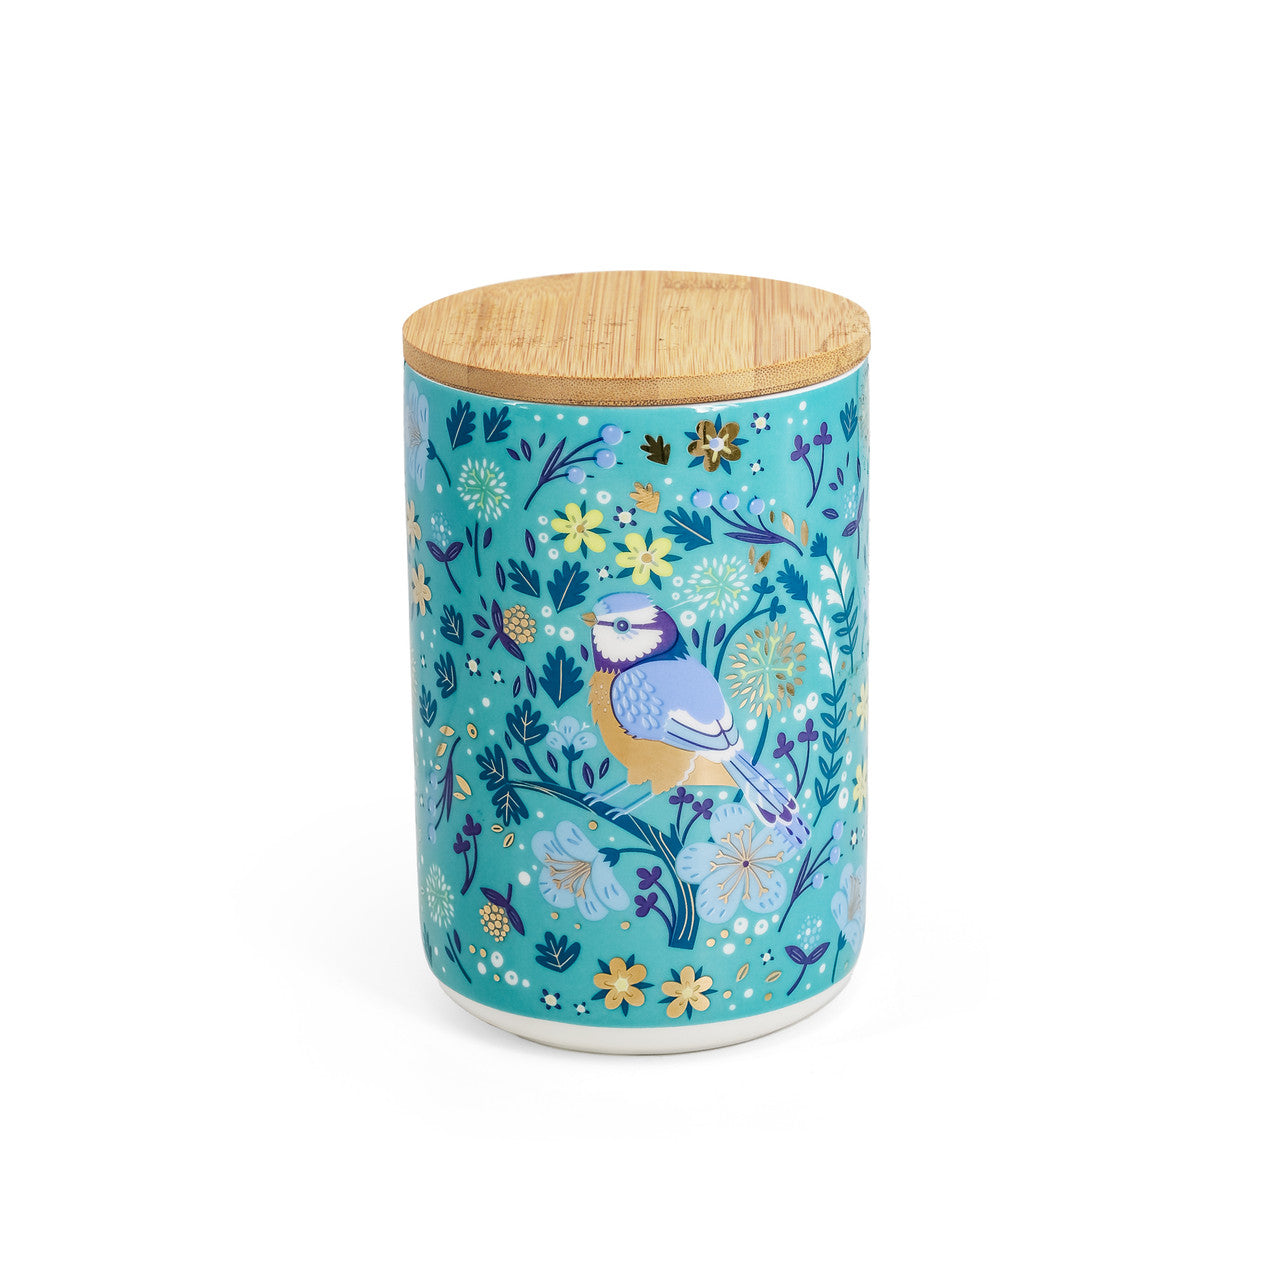 Tipperary Crystal Birdy Storage Jar - Blue Tit - New 2022  New to our collection, this birdy storage jar come beautifully illustrated and presented in a rigid Tipperary Crystal gift box. Makes a wonderful gift to be enjoyed.  The Birdy Collection is a series of 6 exclusively commissioned illustrations inspired by native Irish birds; Bullfinch, Goldfinch, Blue tit, Greenfinch, Kingfisher and Robin.